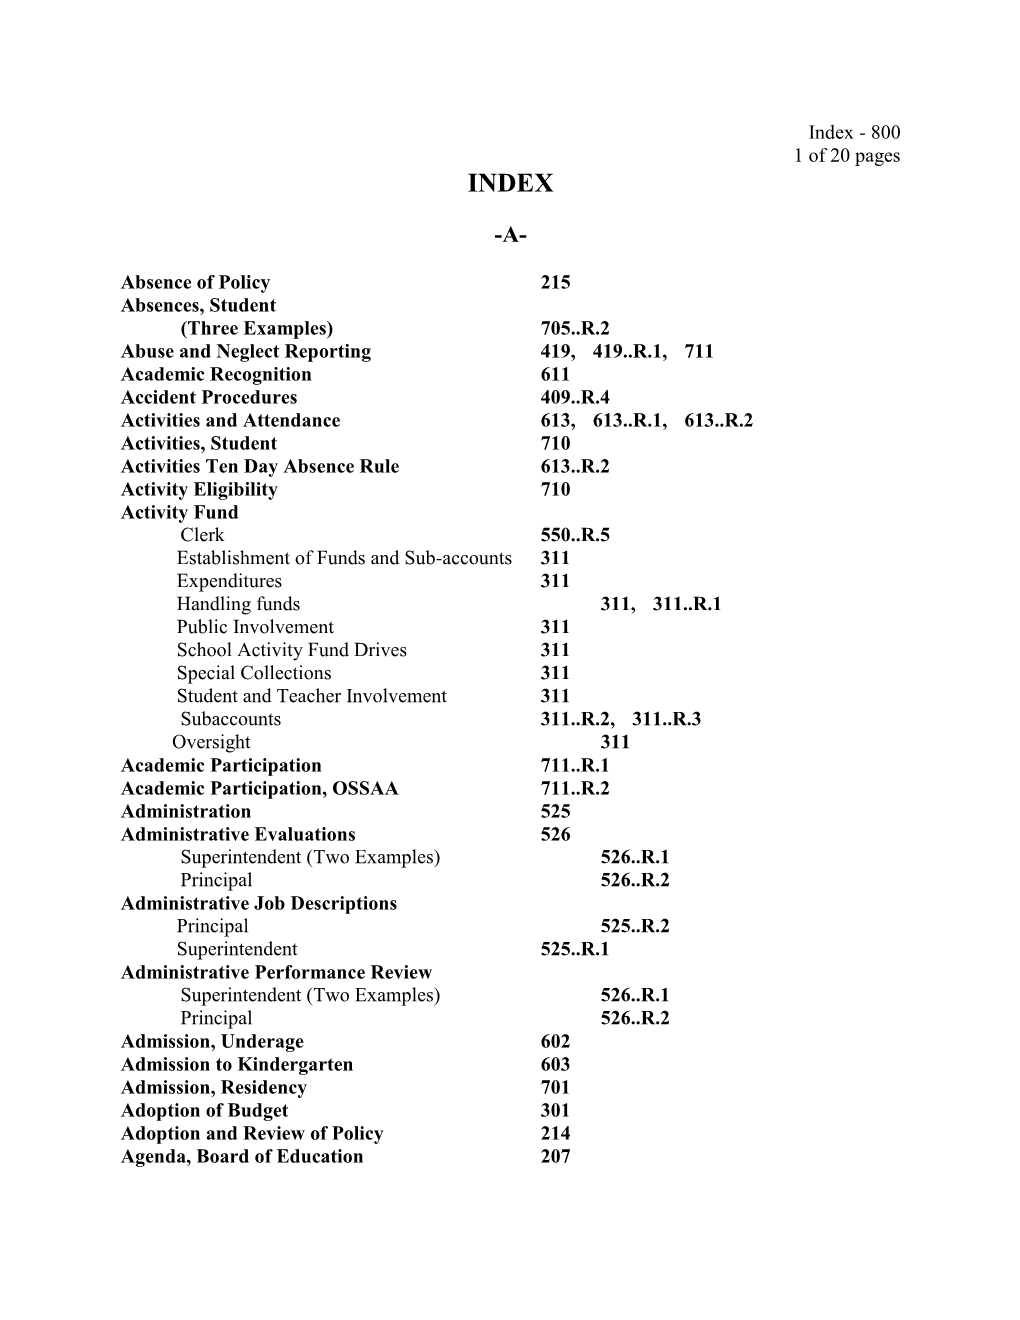 Index - 800 1 of 20 Pages INDEX